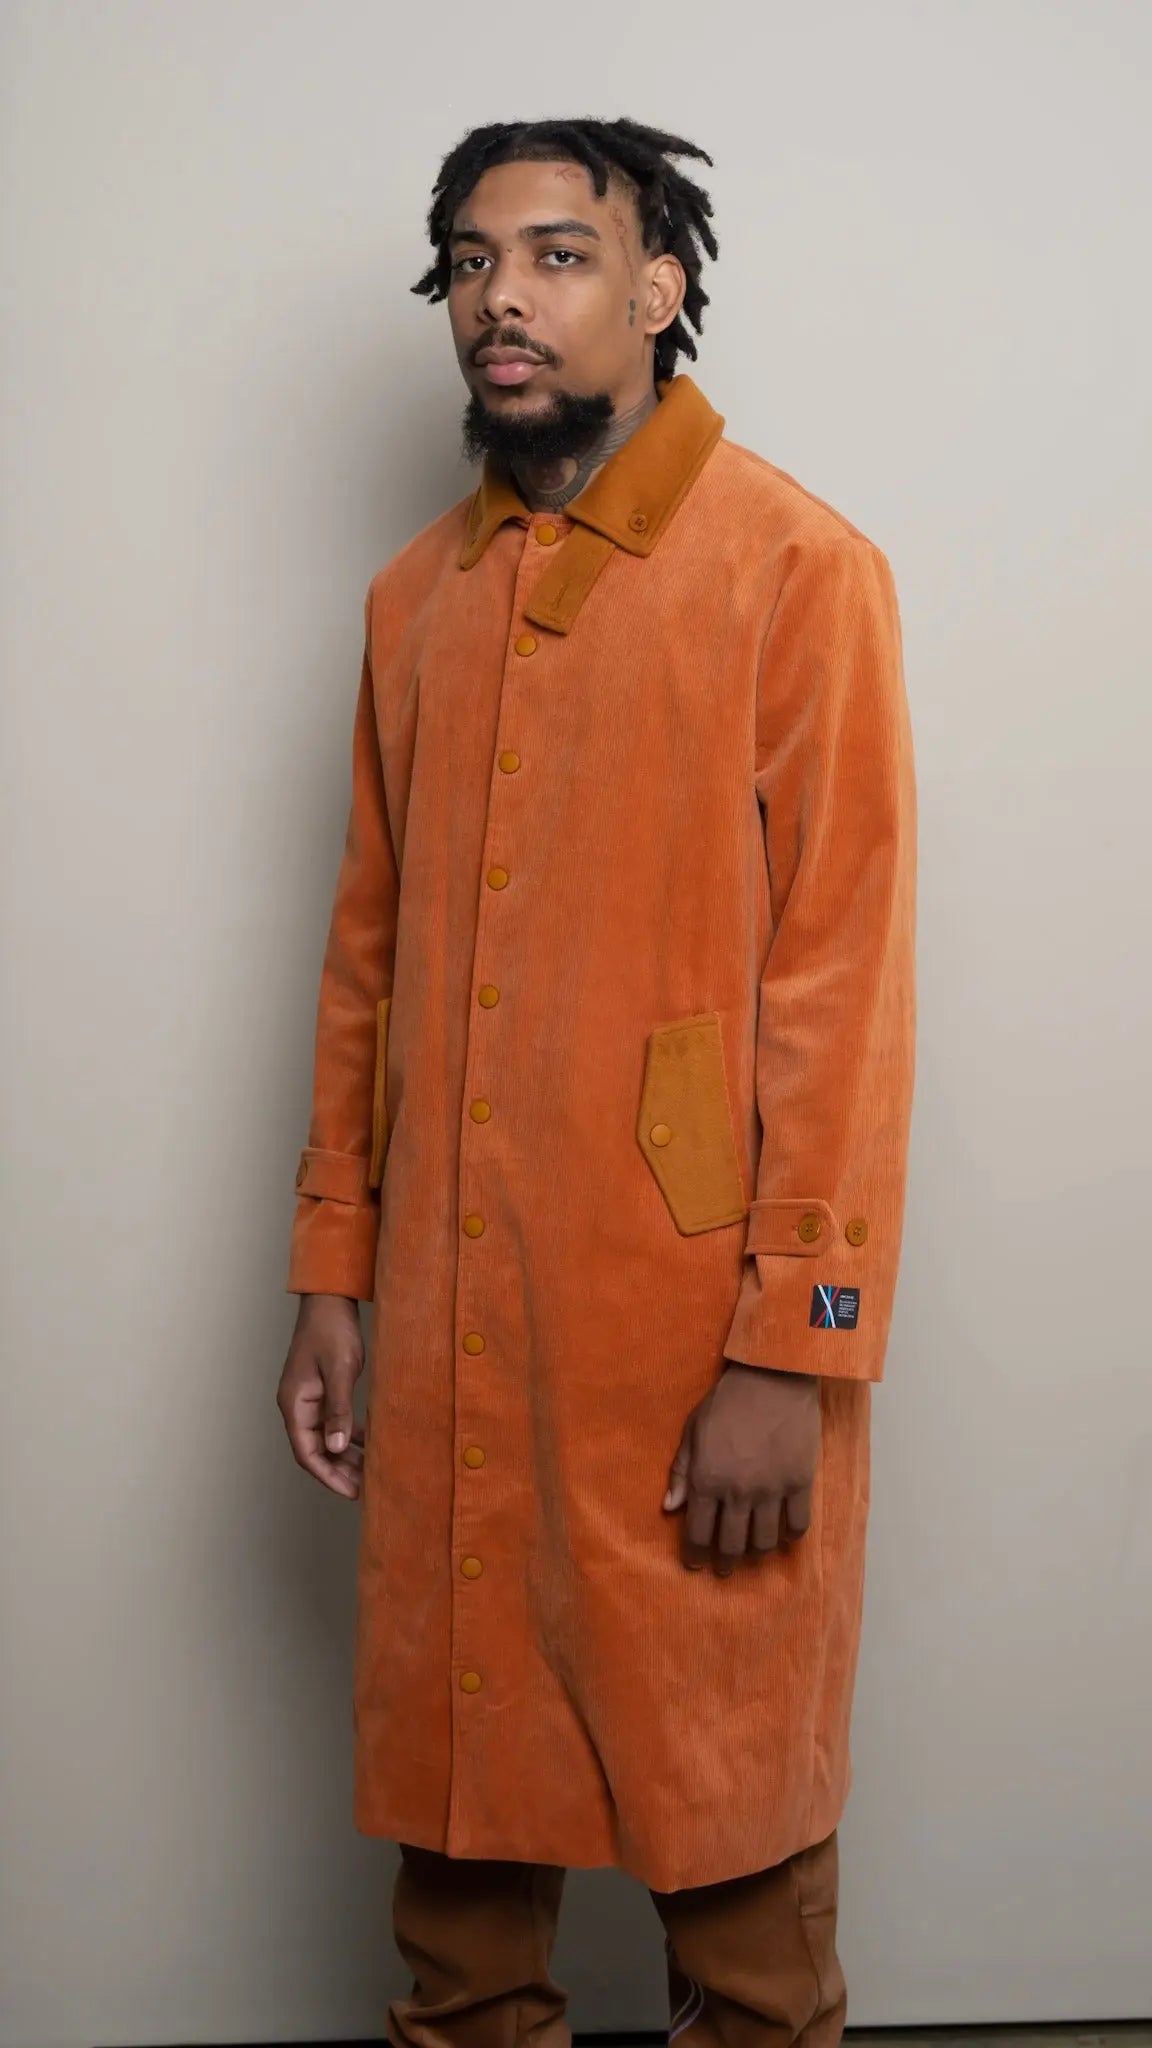 Photo of model in the Arius Juan Burnt Orange Earthly Trench Coat posing for product picture.